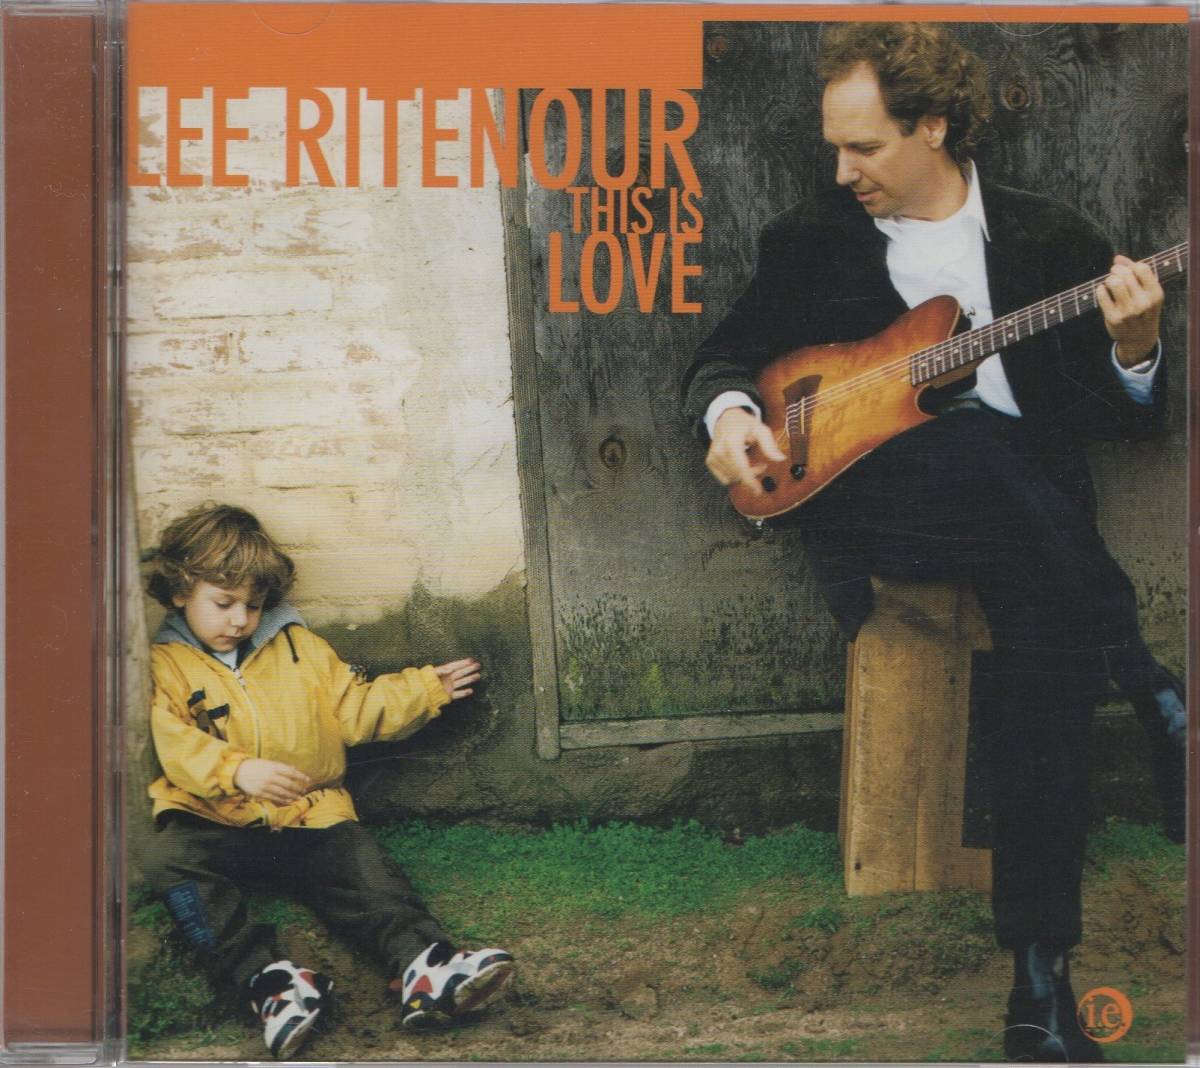 【CD】LEE RITENOUR - THIS IS LOVE (リー・リトナー - ディス・イズ・ラヴ)_画像1